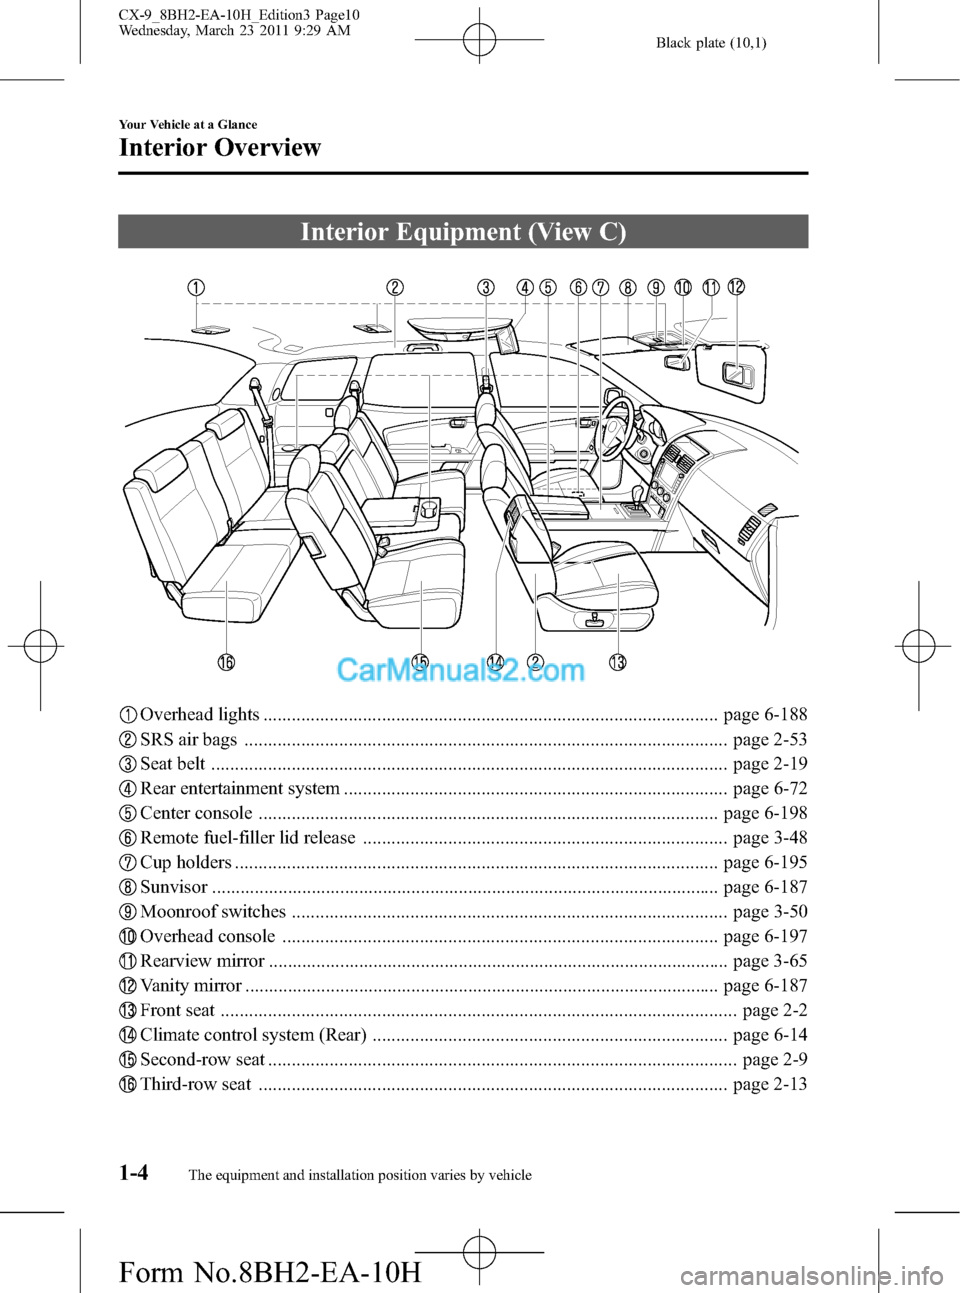 MAZDA MODEL CX-9 2011  Owners Manual (in English) Black plate (10,1)
Interior Equipment (View C)
Overhead lights ................................................................................................ page 6-188
SRS air bags ................